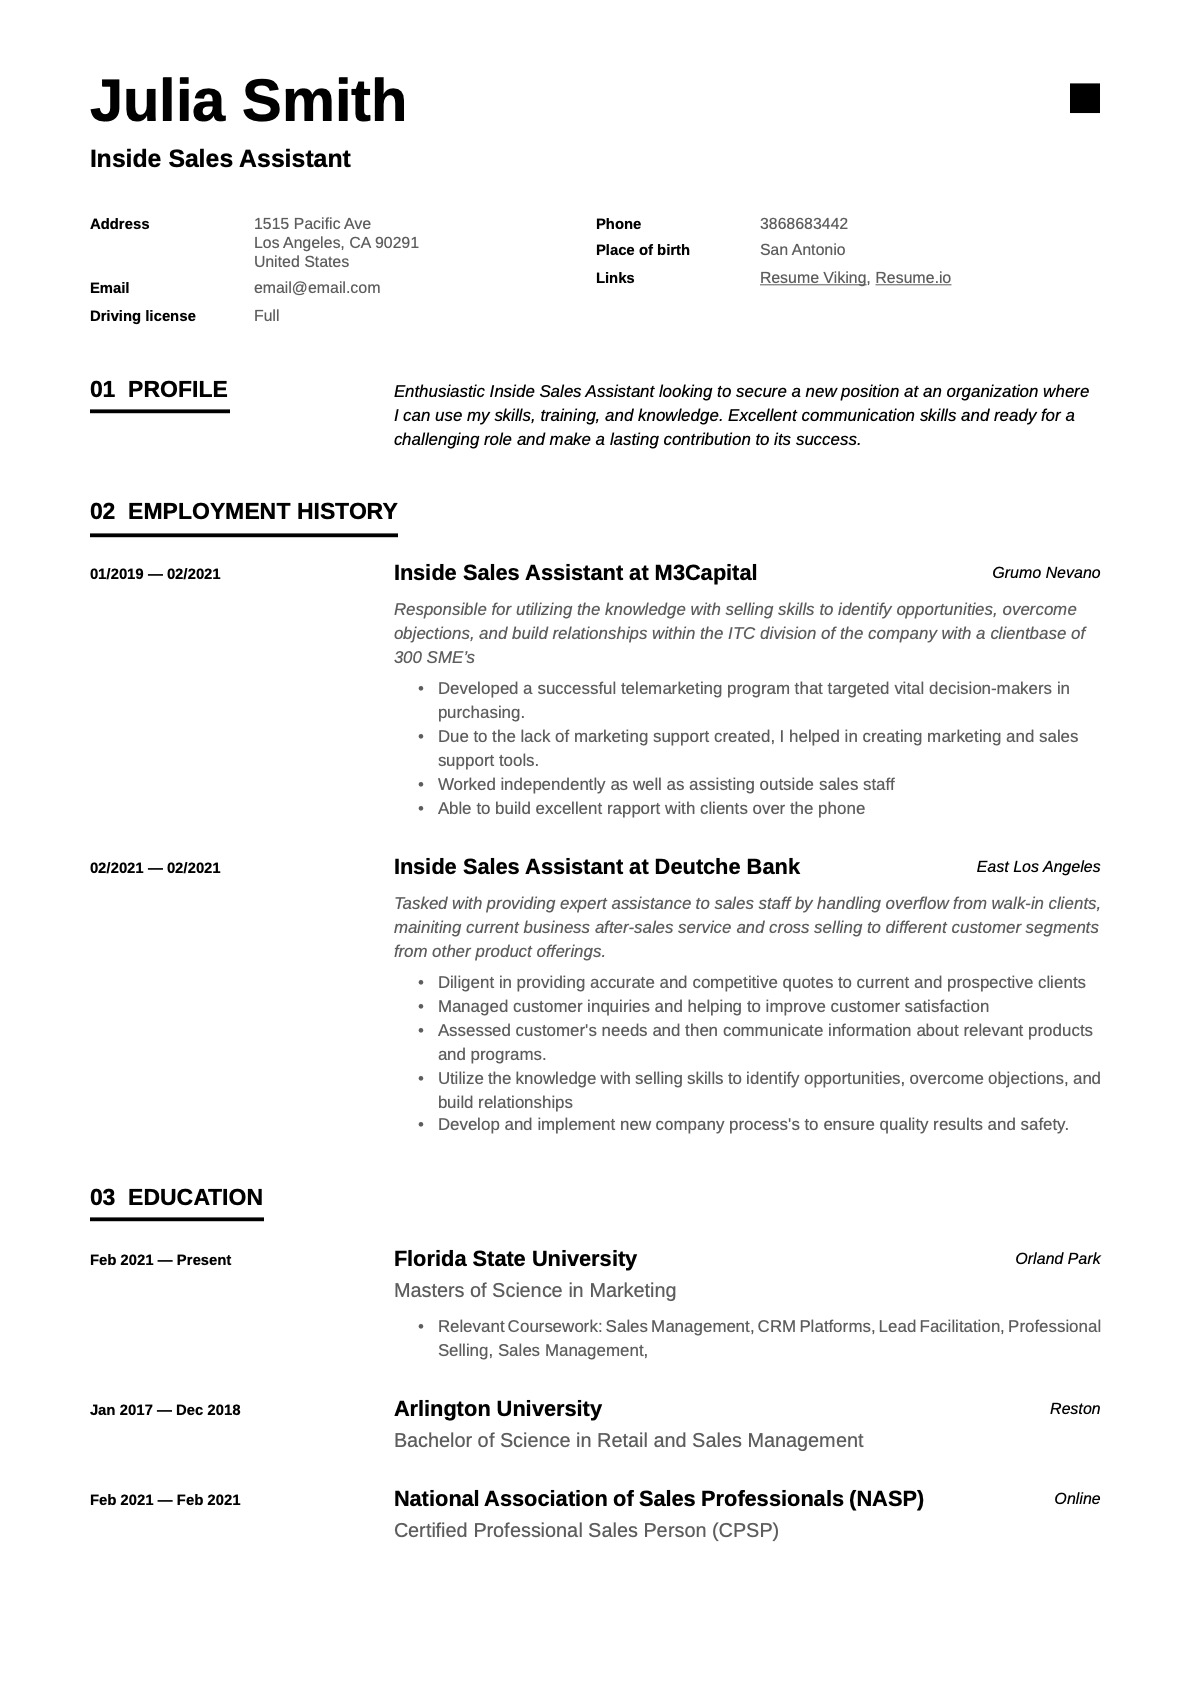 Example Resume Inside Sales Assistant-11